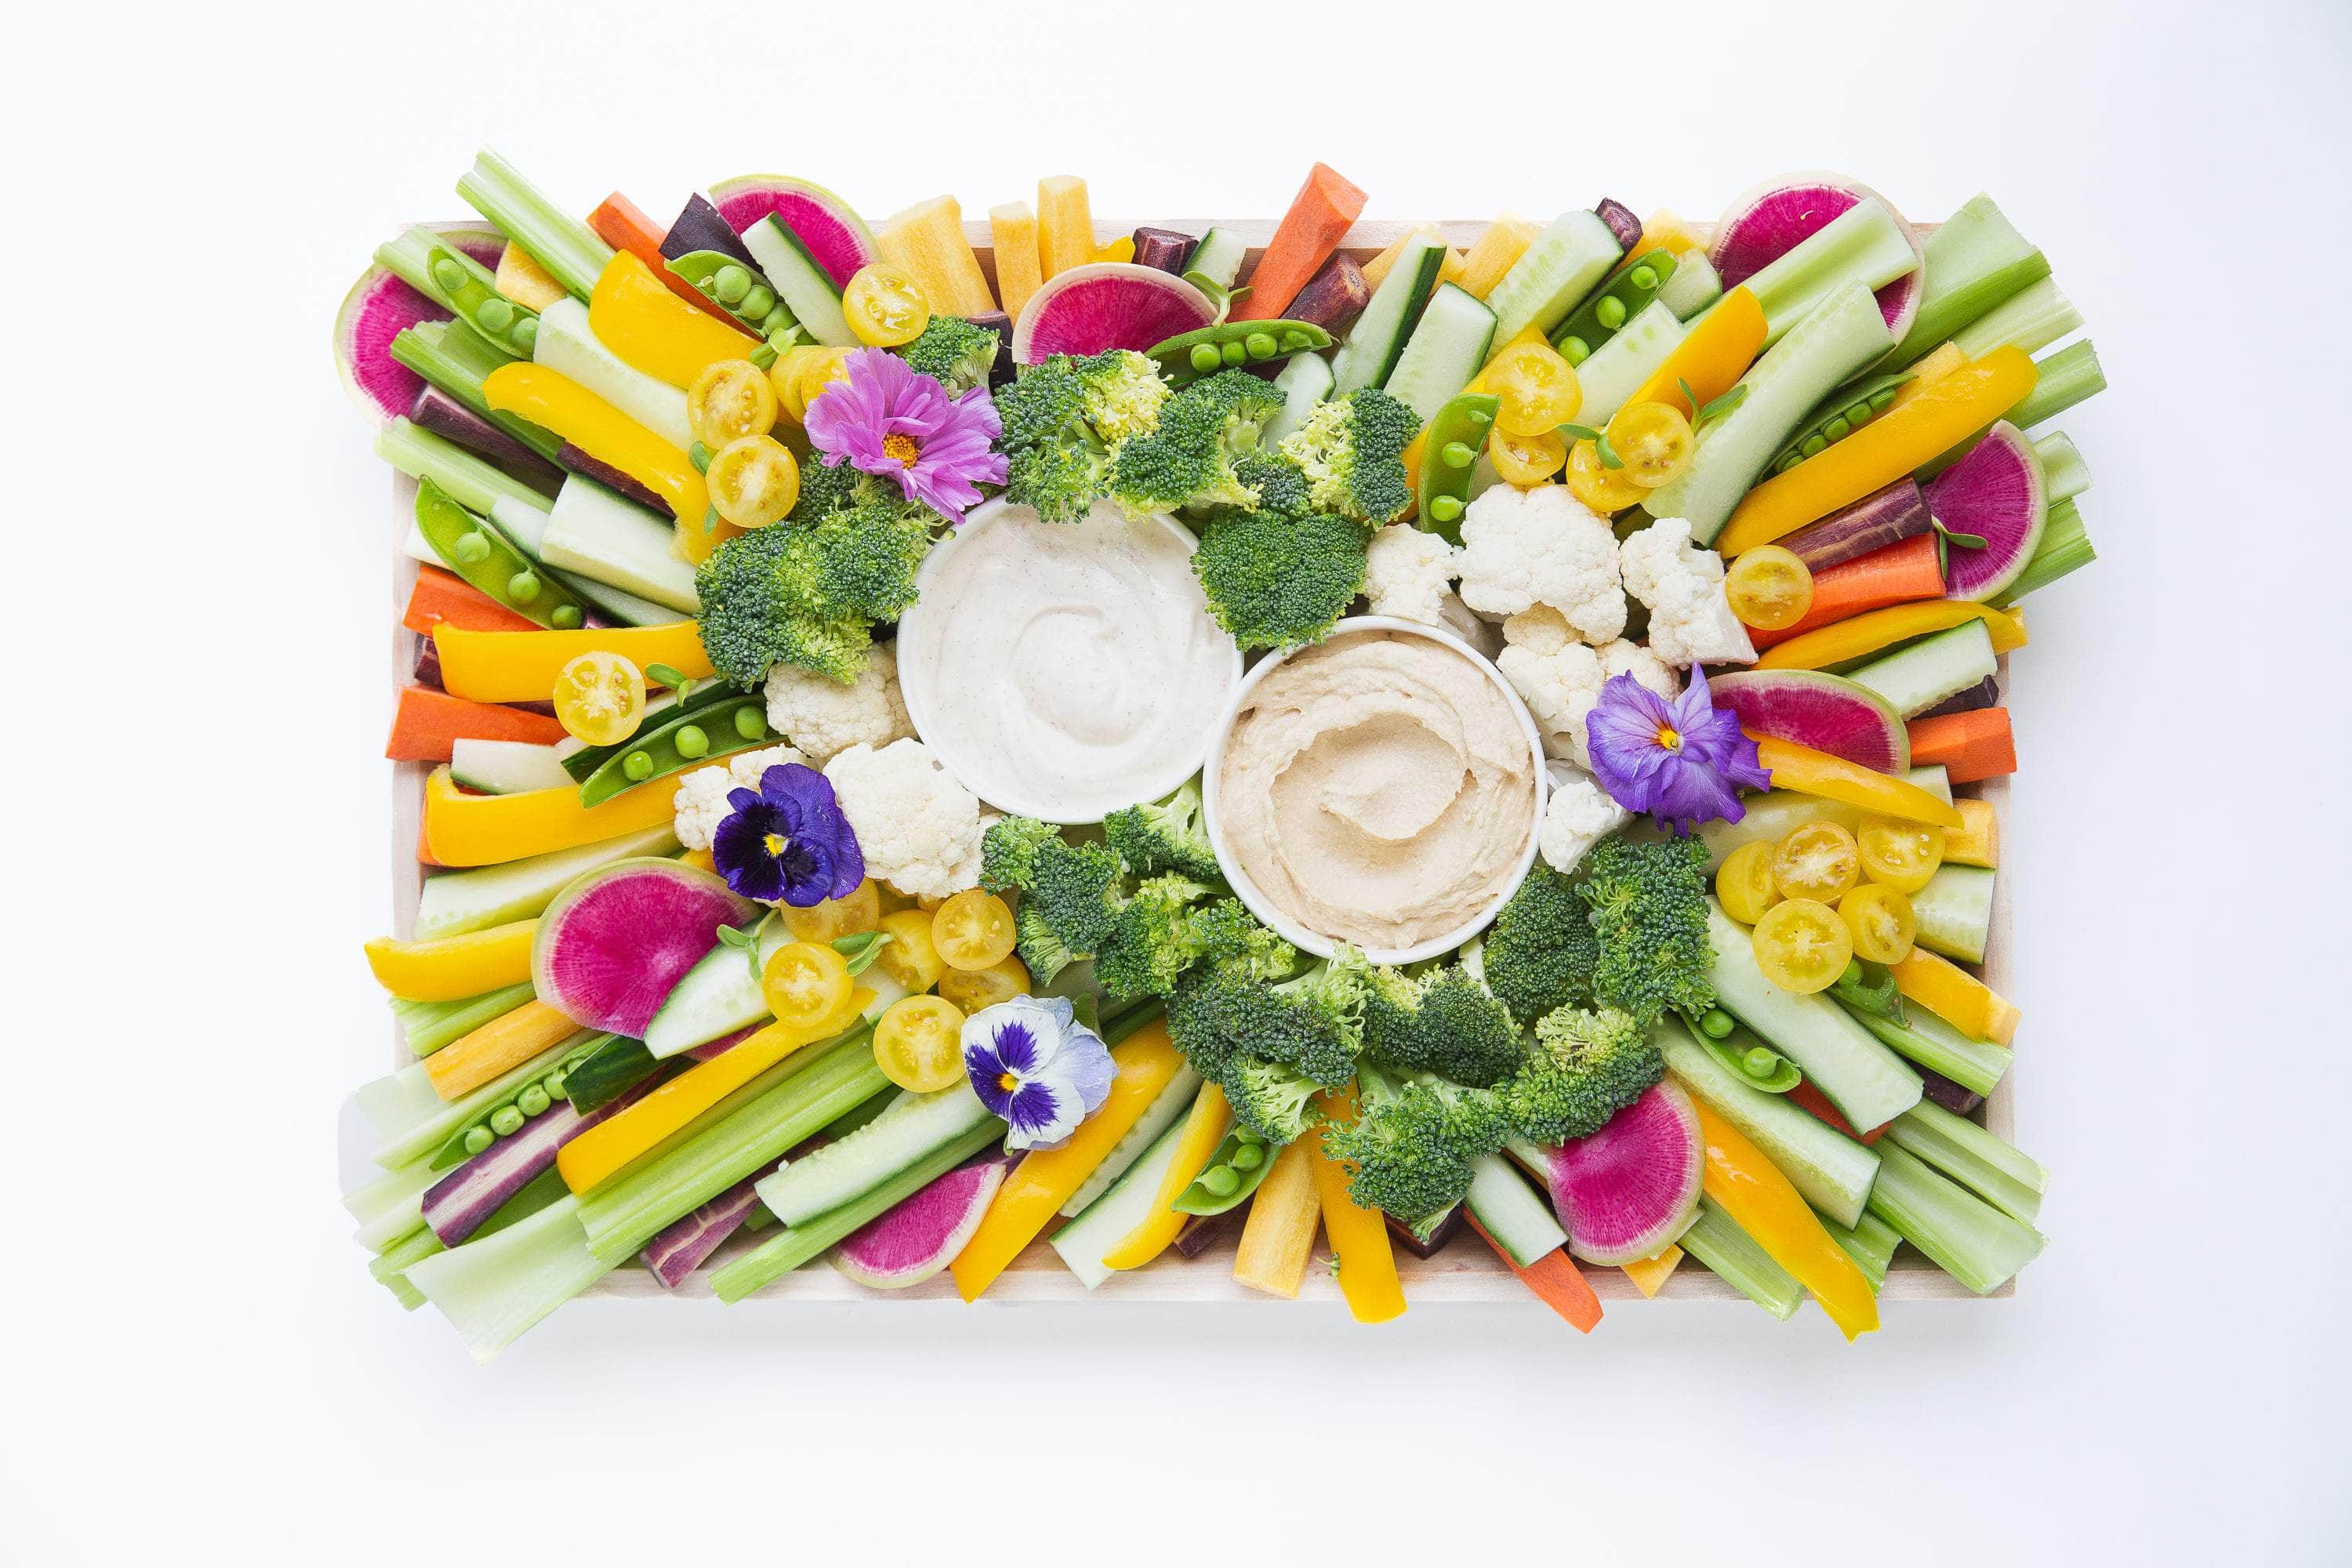 Best crudite platter with delivery in Toronto Ontario